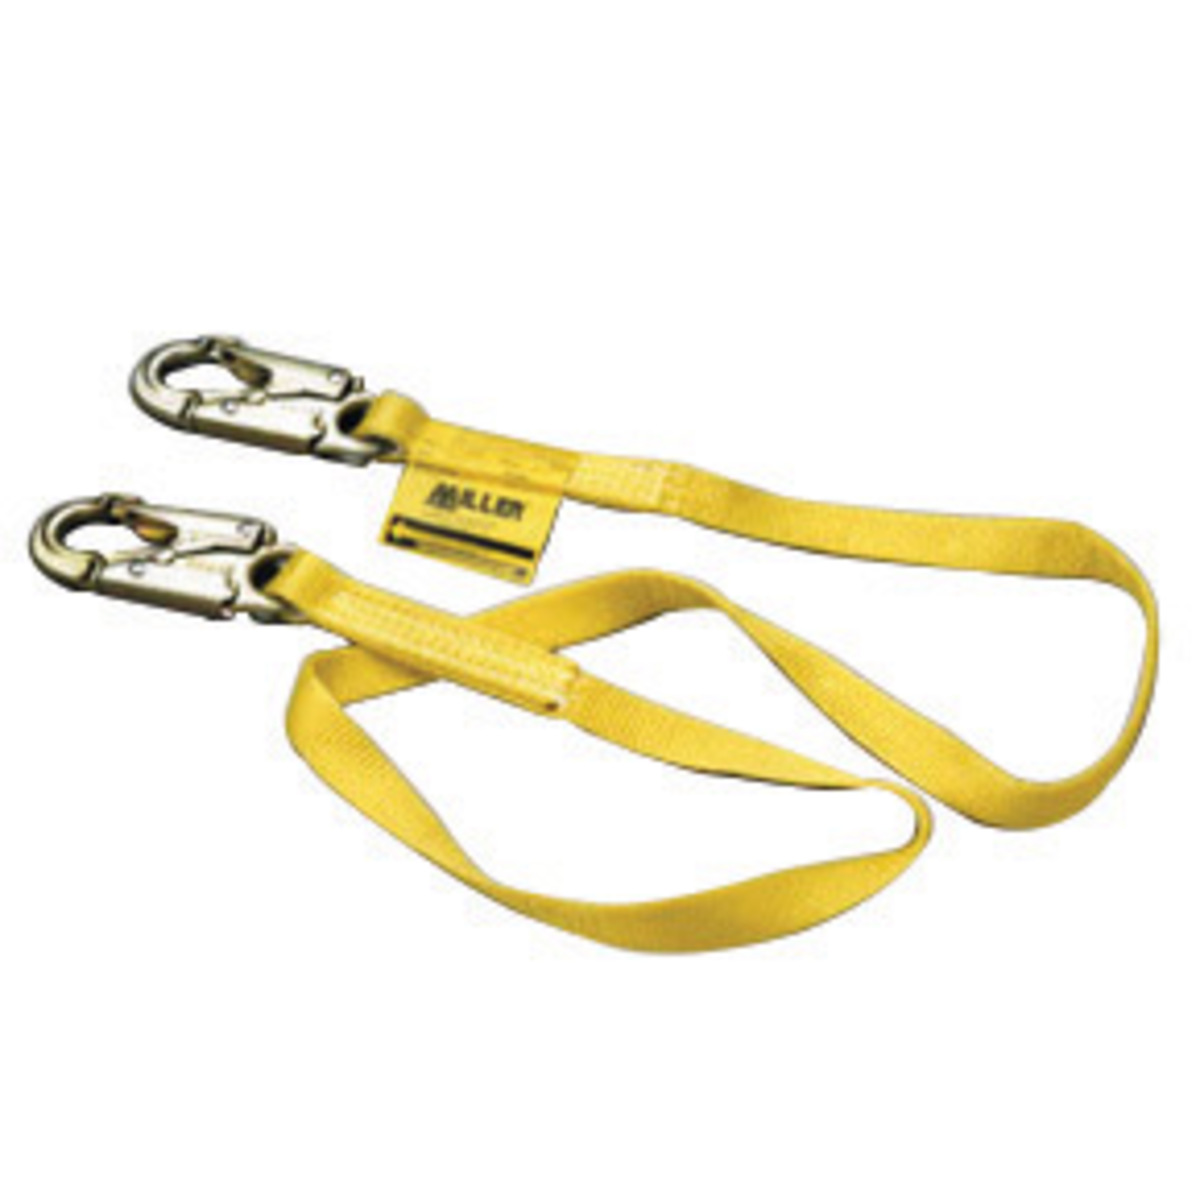 Honeywell Miller® 3' Web Positioning Lanyard With Locking Snap Hook Harness Connector